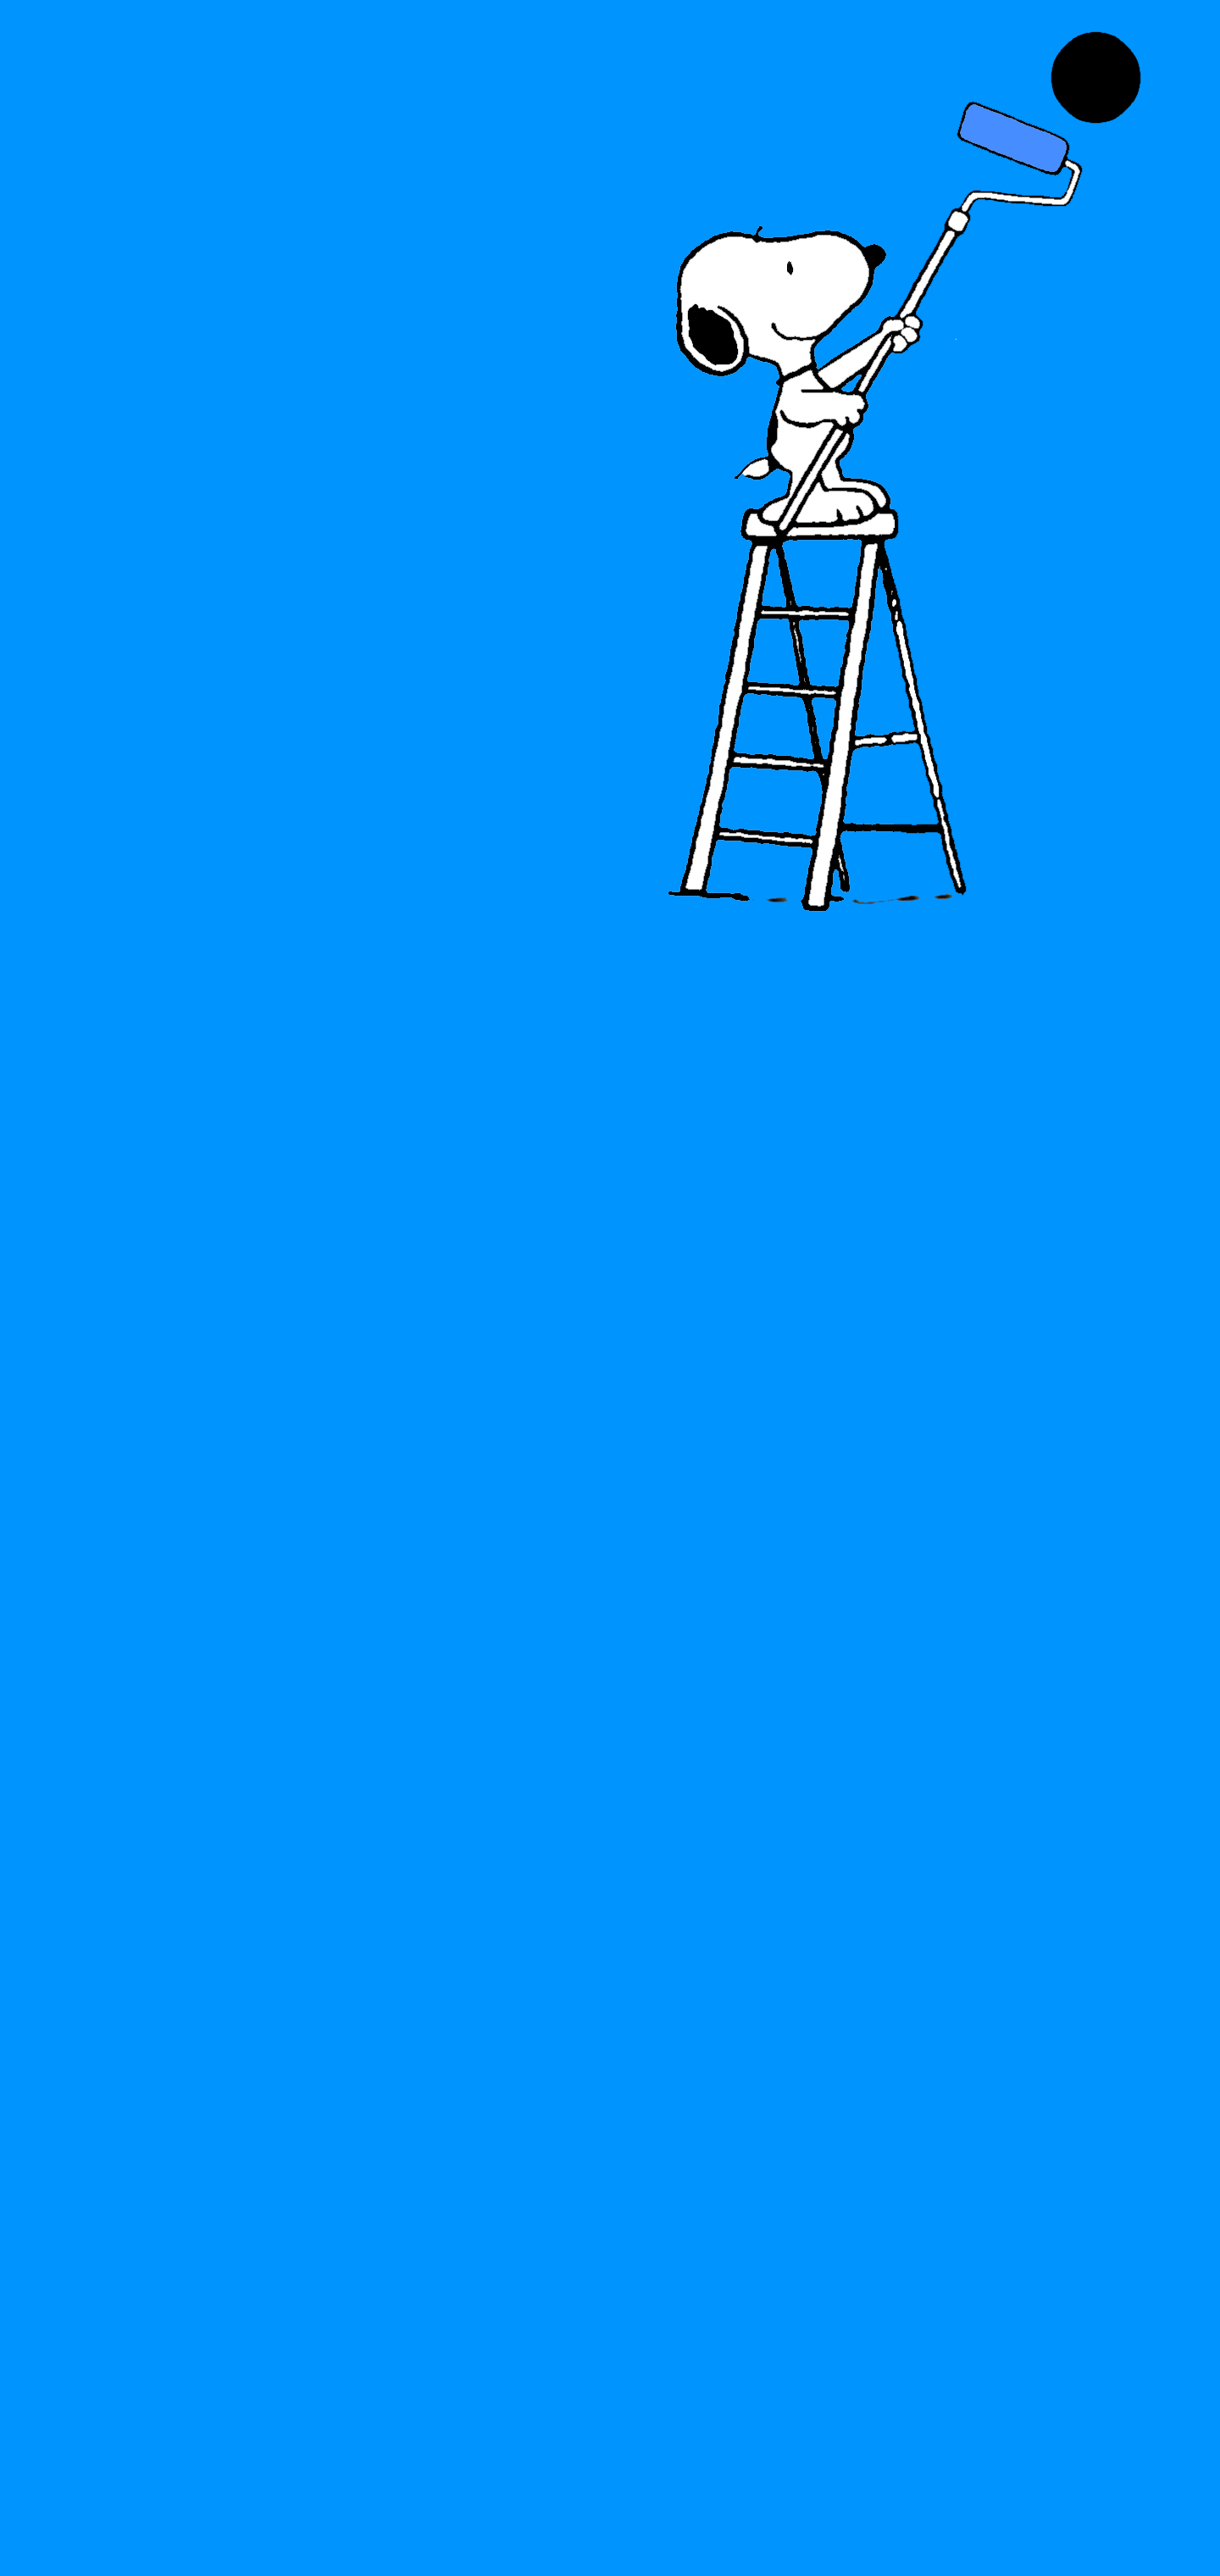 1440x3040 Snoopy Paints 3 by CasualCrowe Galaxy S10 Hole-Punch Wallpaper